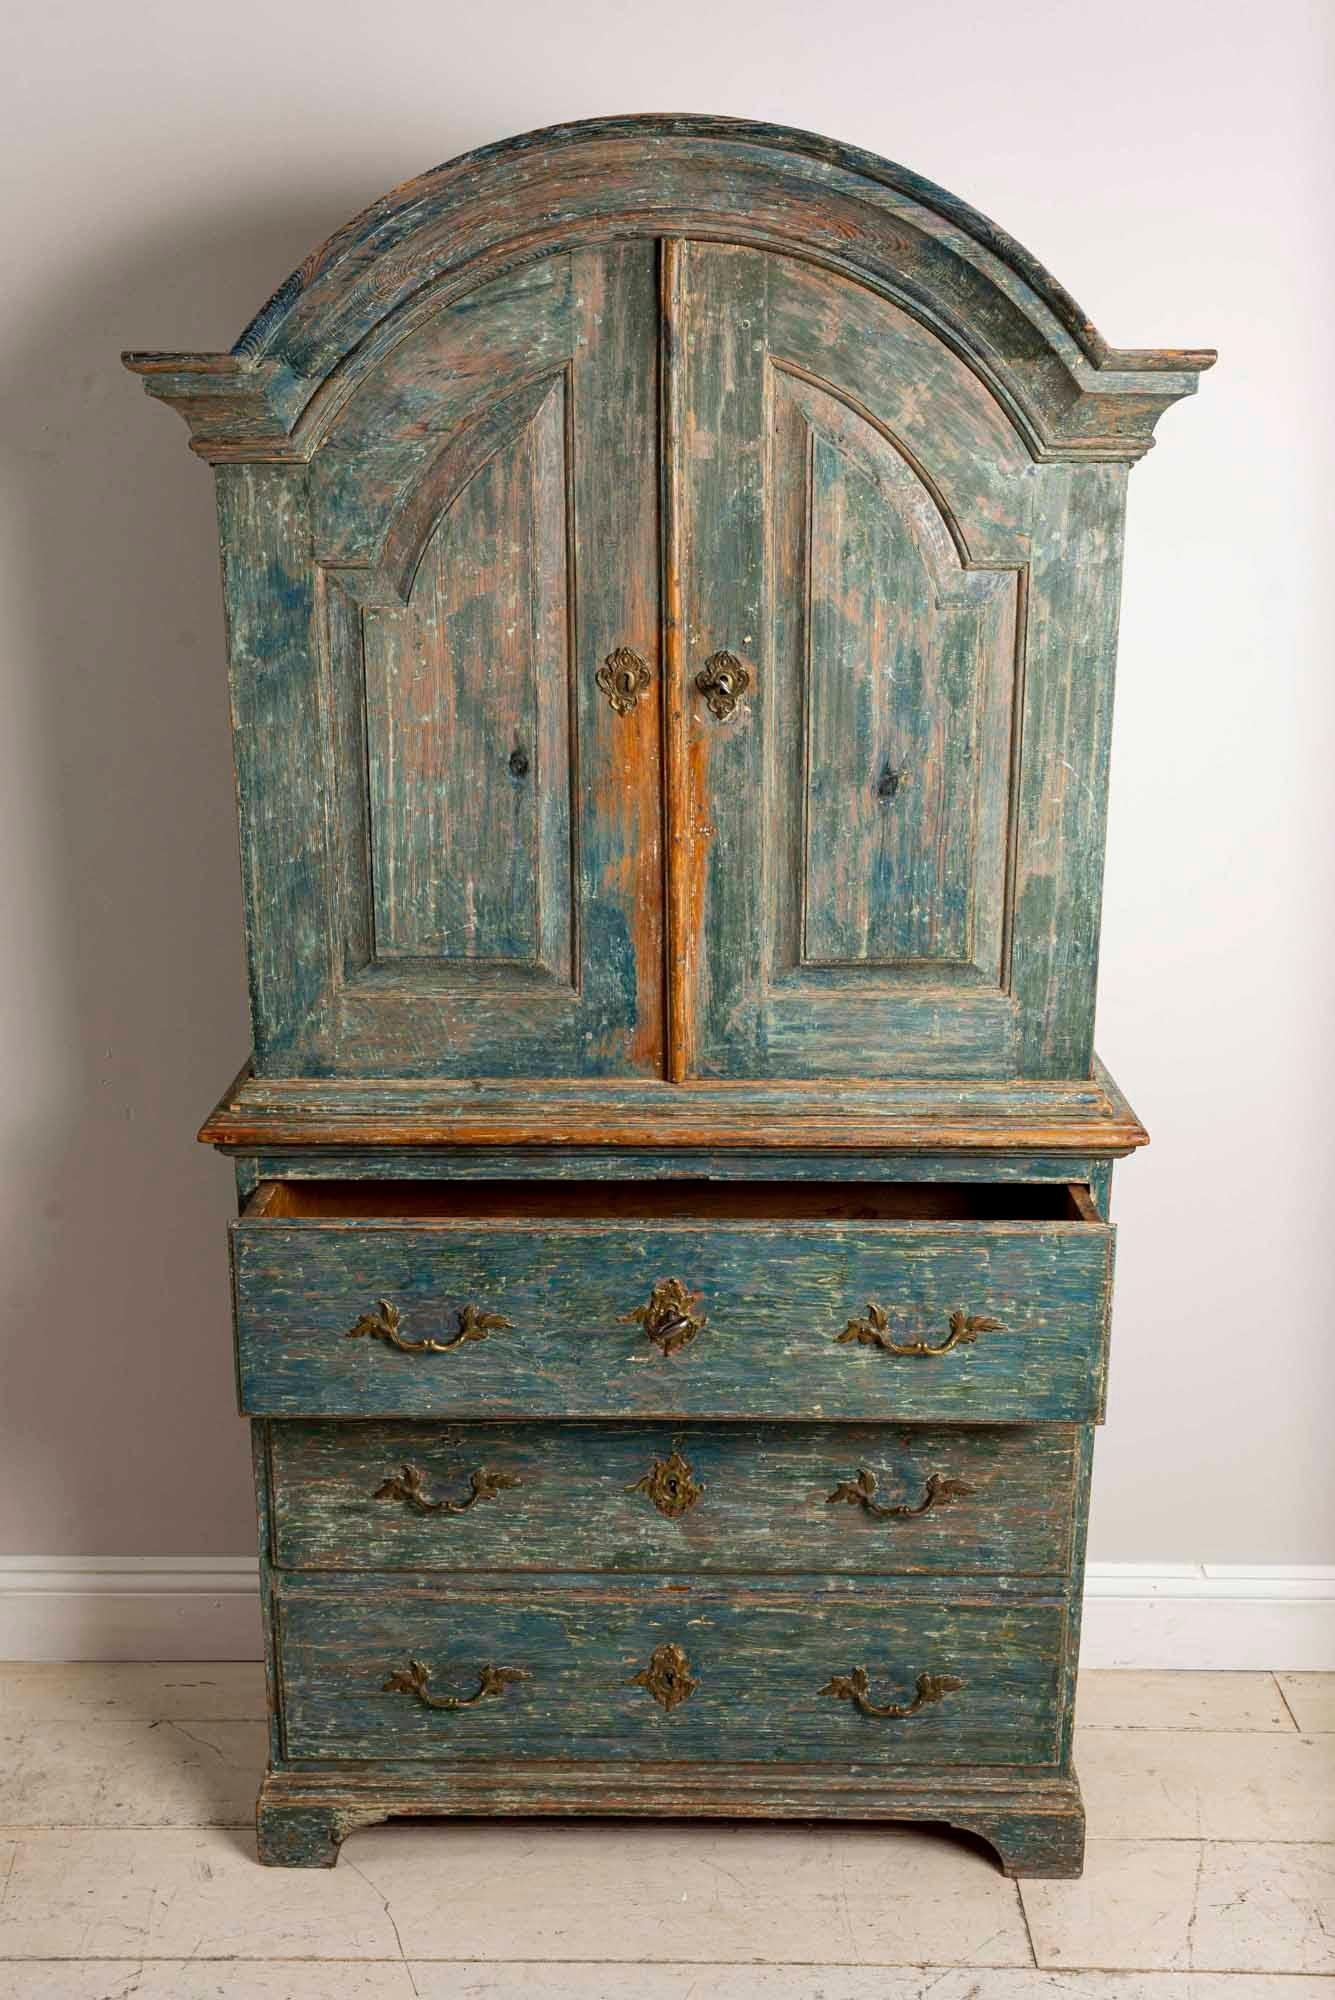 Late 18th century Swedish cupboard or armoire which features its original turquoise and orange paint.
The armoire also comes with its original working keys
This is a good size for most rooms, making it highly desirable 
The colour is absolutely